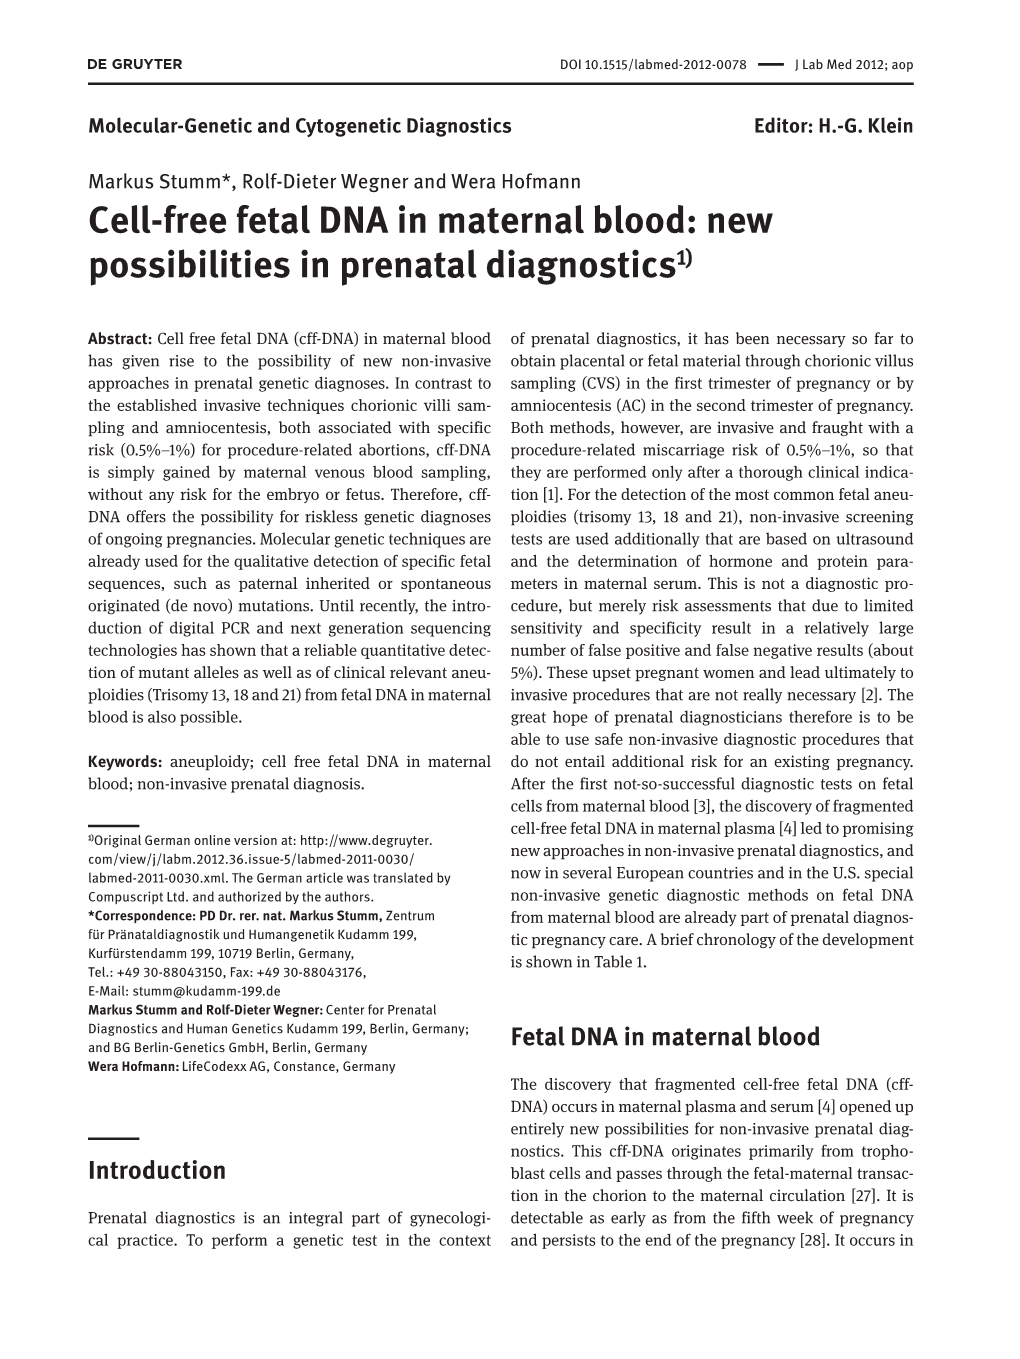 Cell-Free Fetal DNA in Maternal Blood: New Possibilities in Prenatal Diagnostics1)